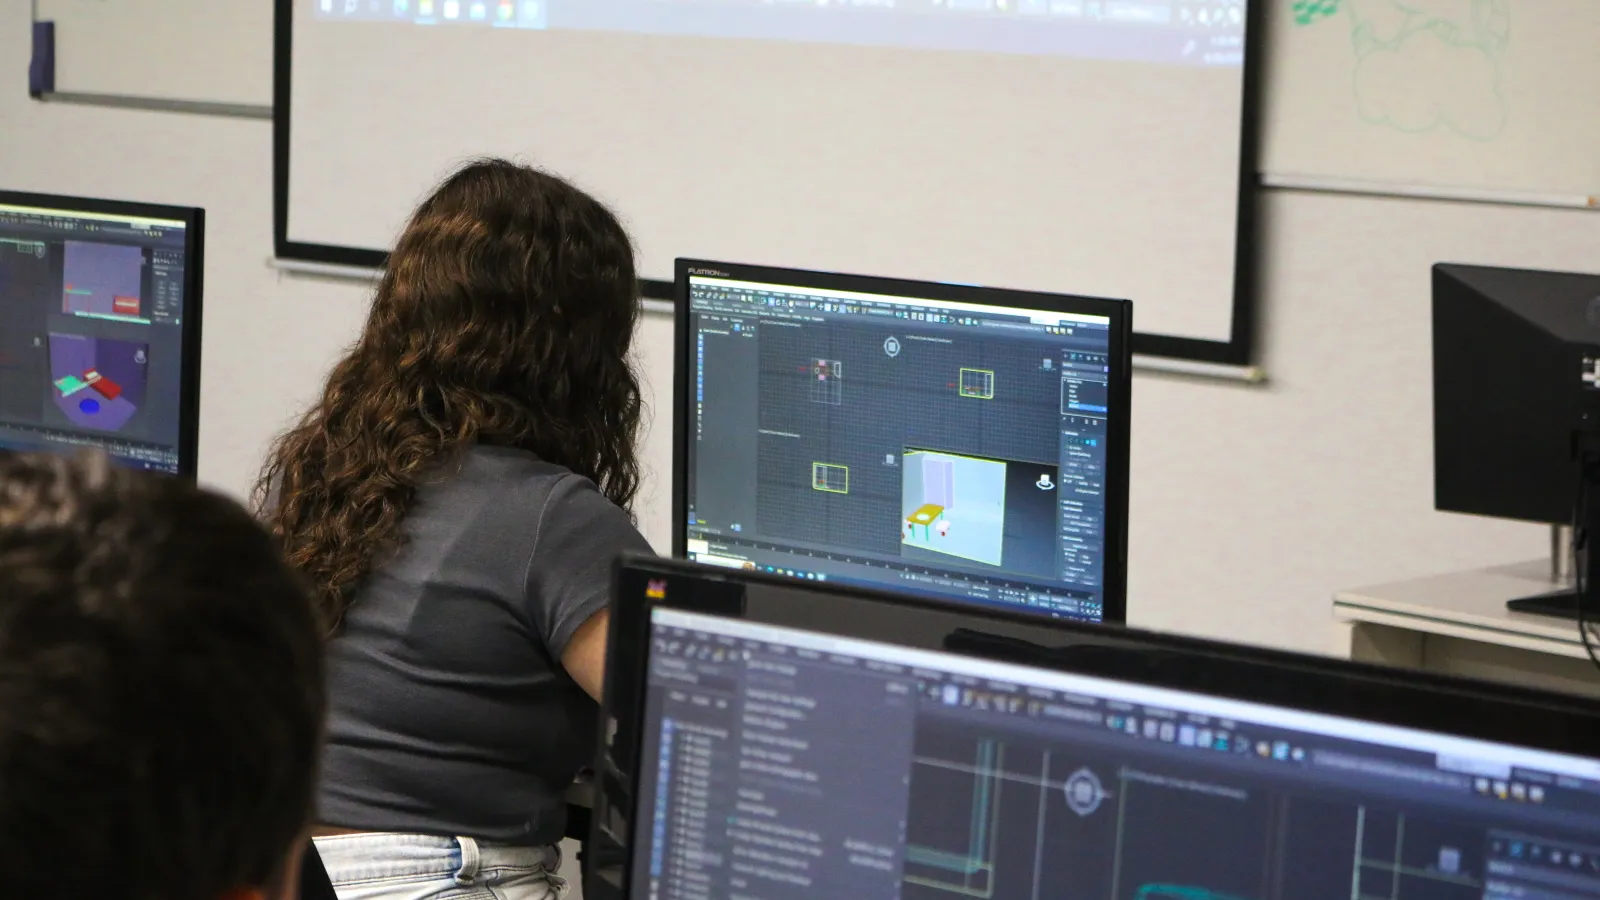 A girl using the adquired skills during the class to work on her 3D animation project